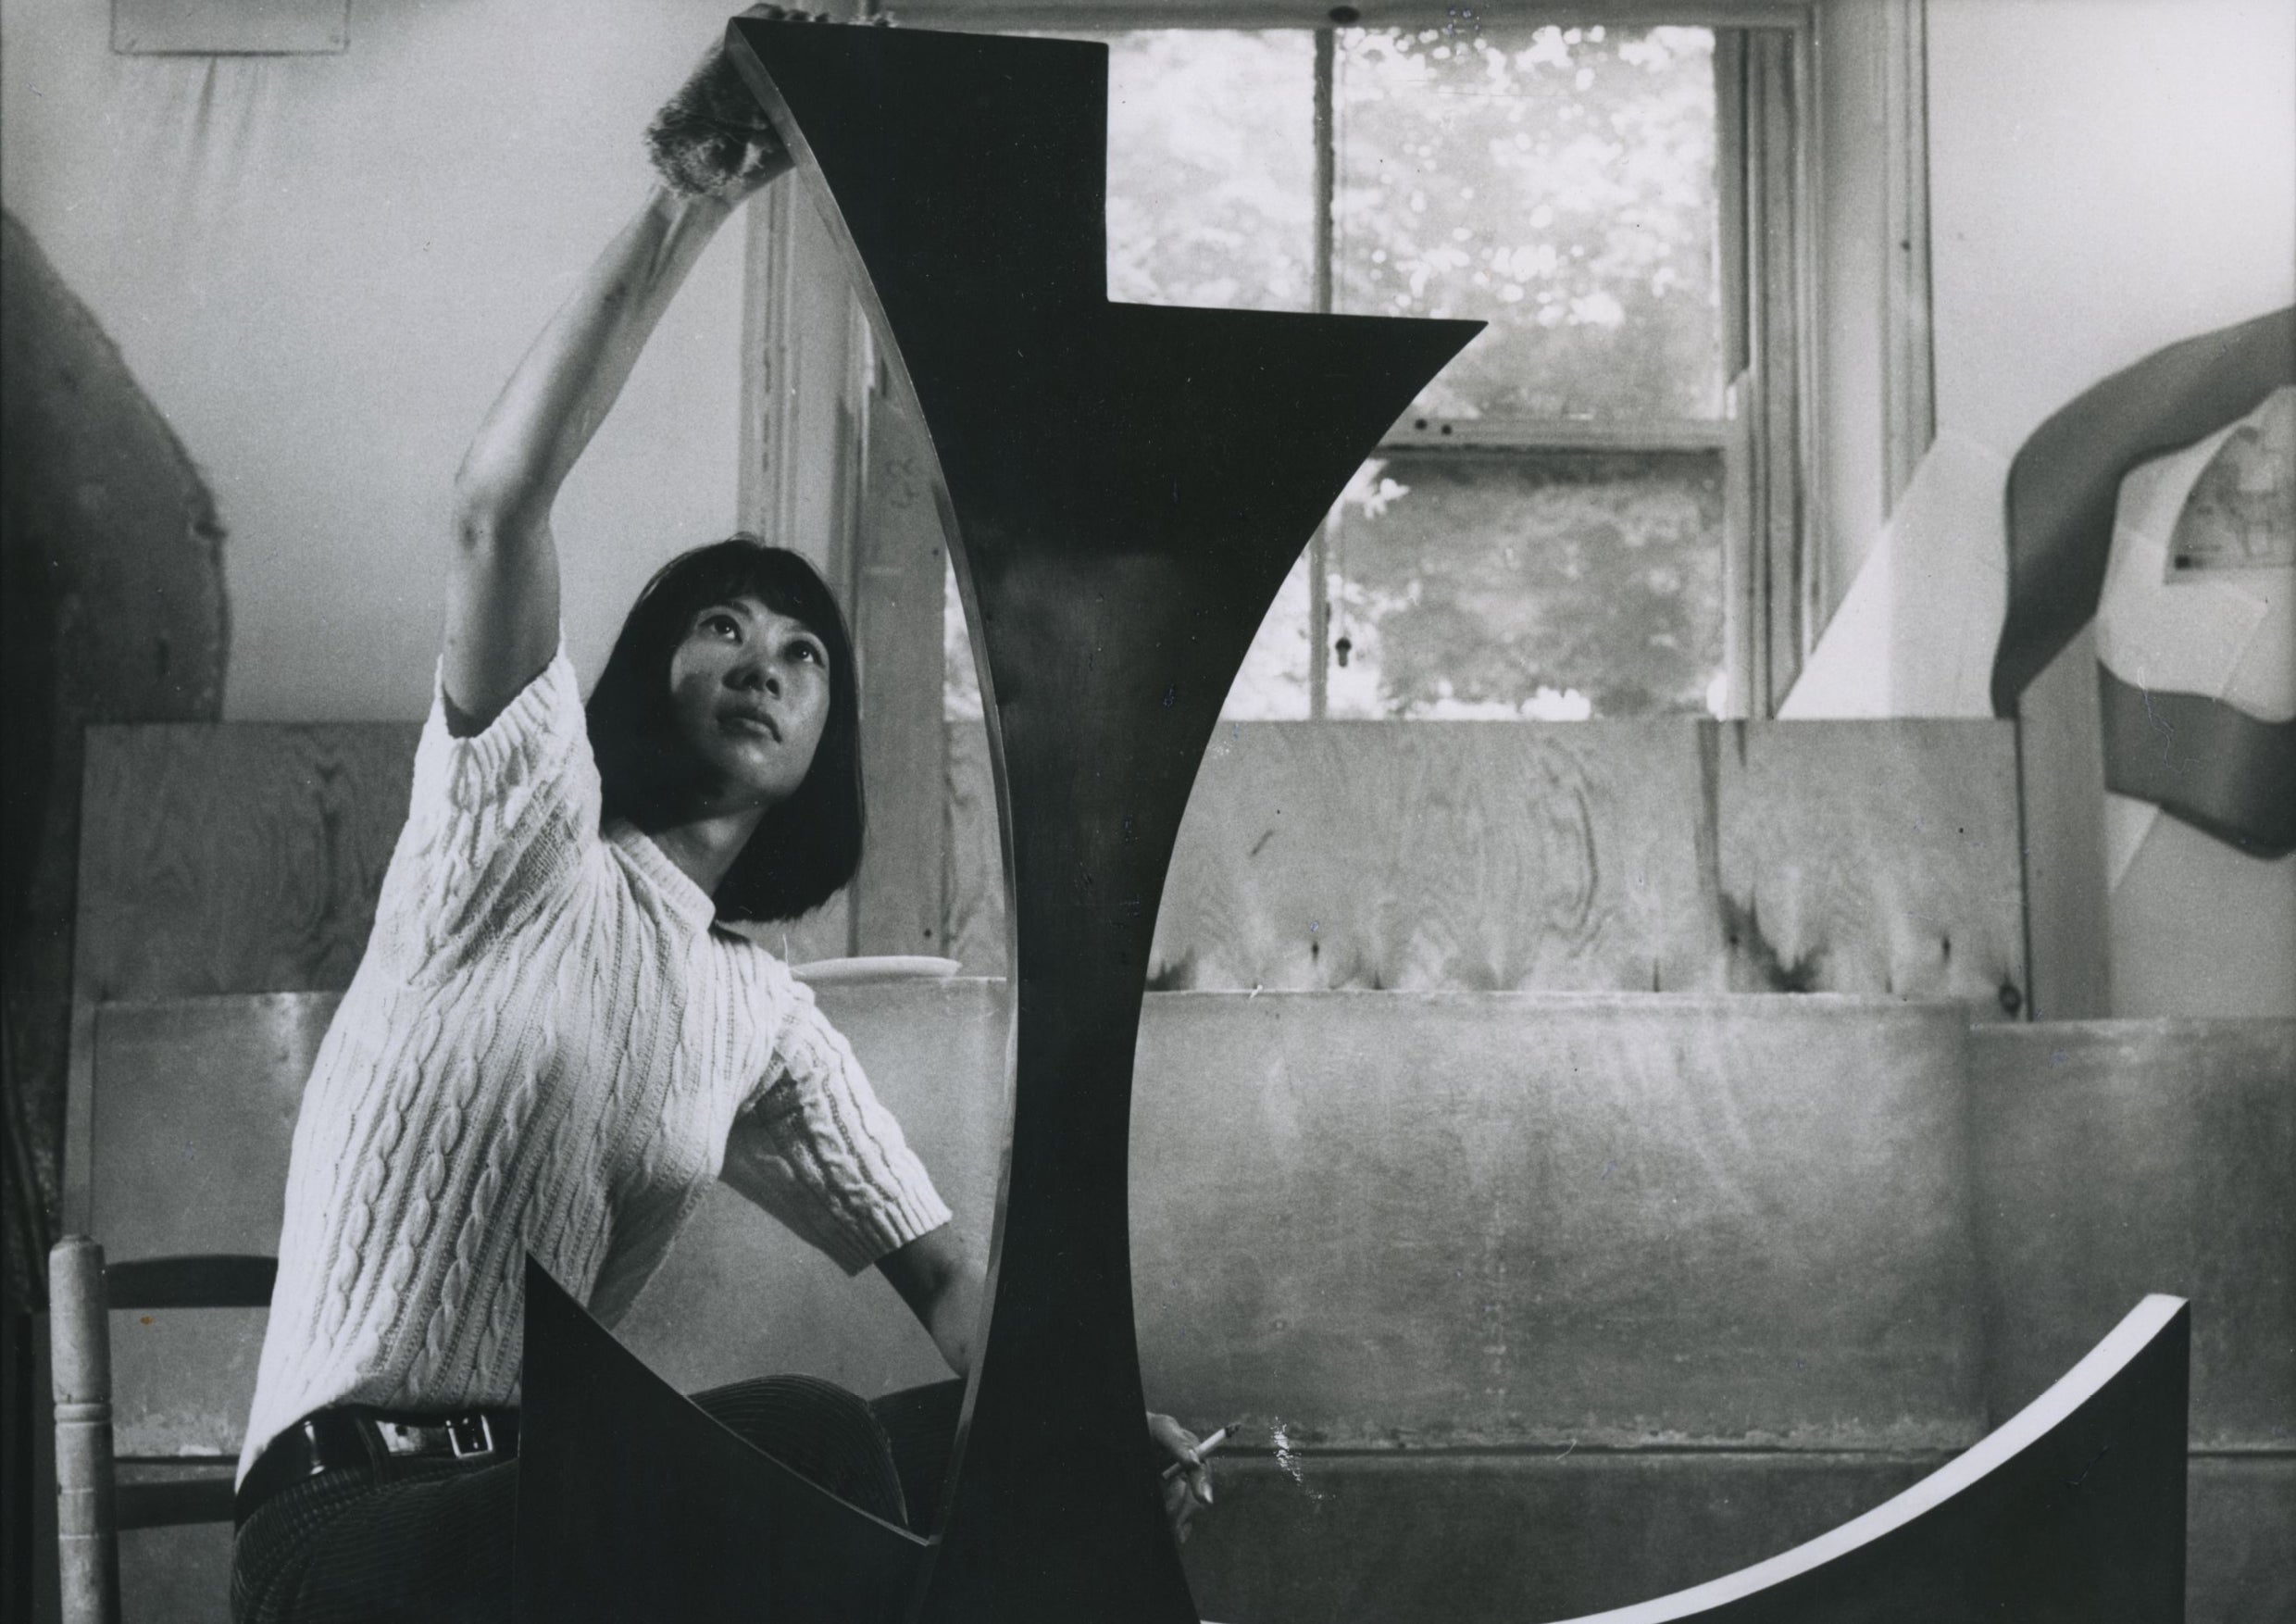 Black and white photograph of woman building an art sculpture